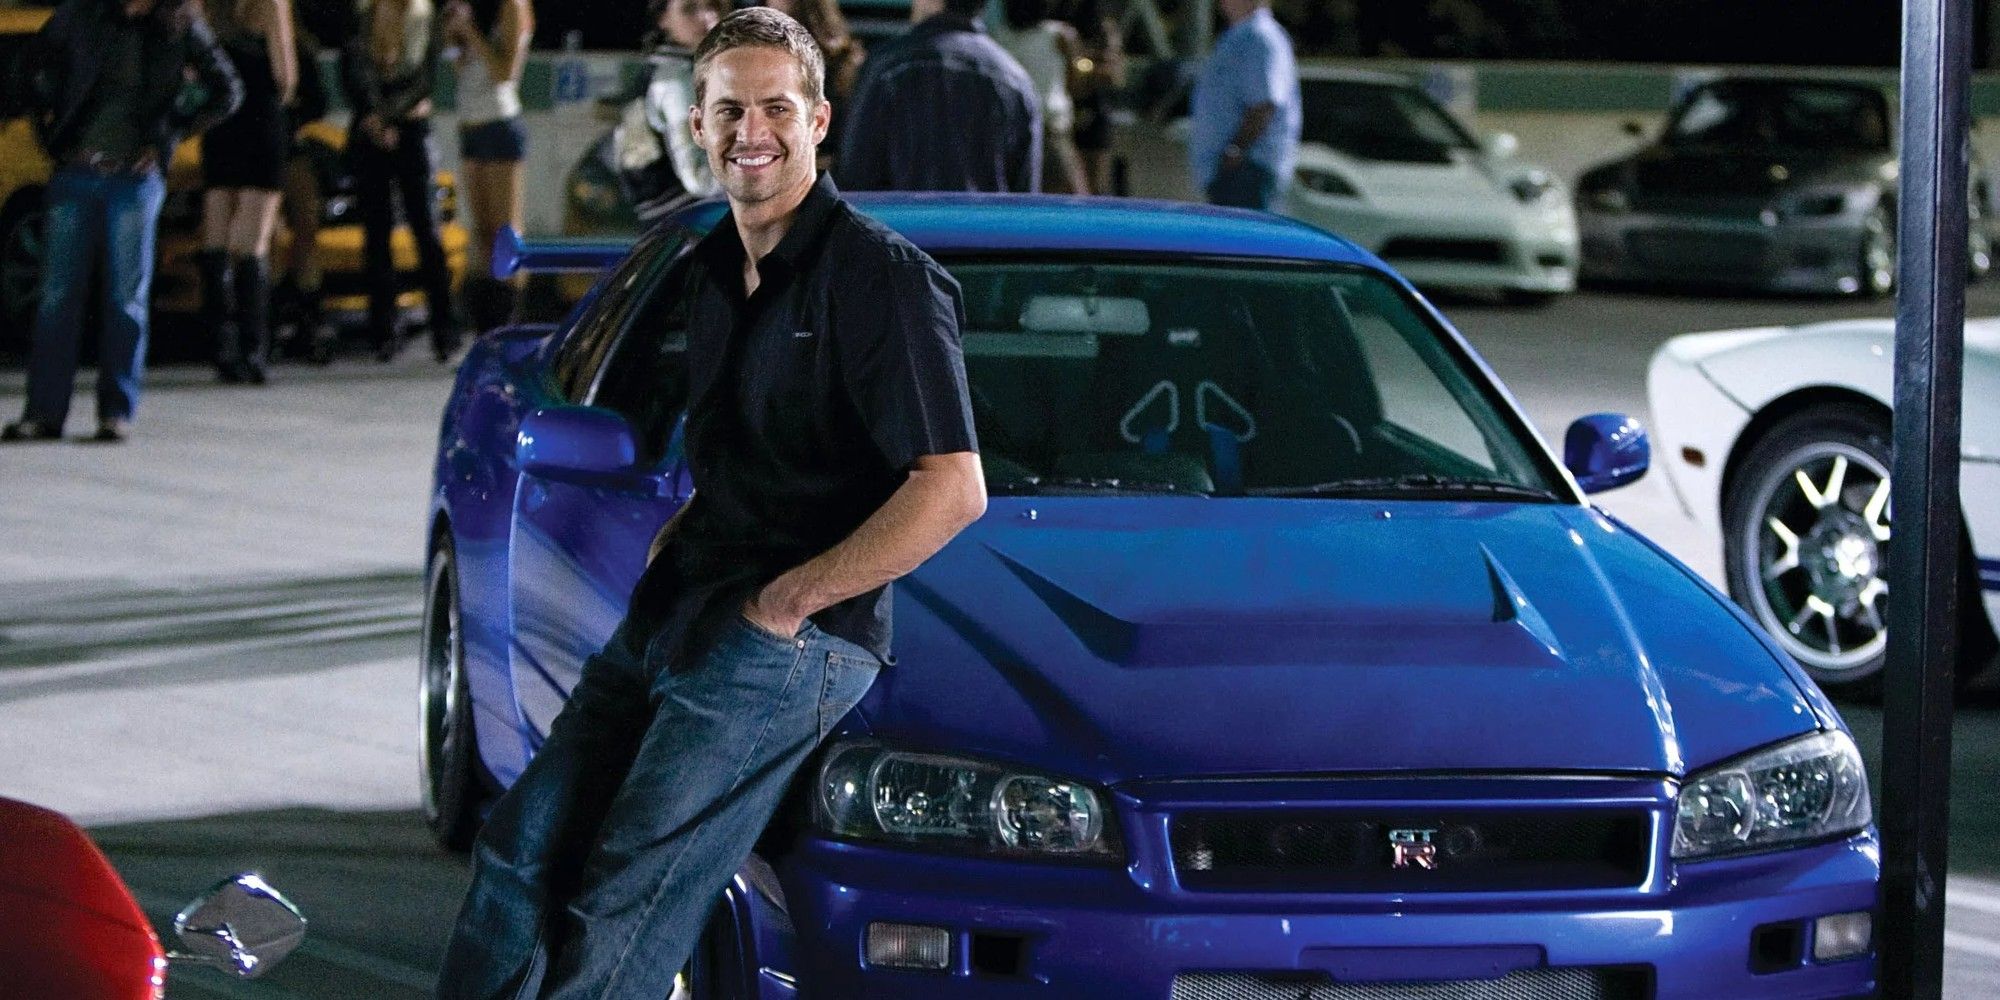 Brian smiling while standing next to his blue Nissan in Fast and the Furious